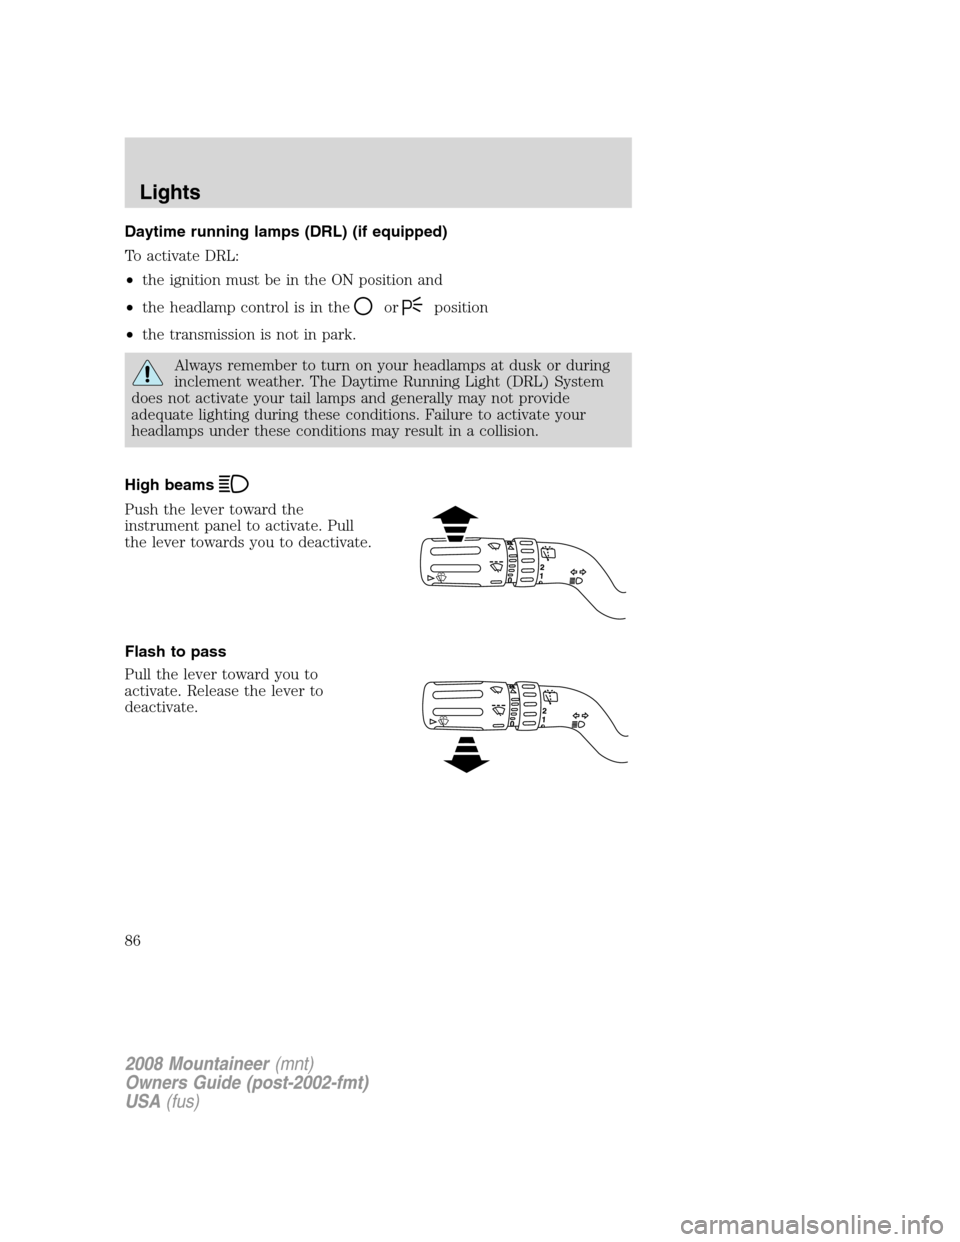 Mercury Mountaineer 2008  Owners Manuals Daytime running lamps (DRL) (if equipped)
To activate DRL:
•the ignition must be in the ON position and
•the headlamp control is in the
orposition
•the transmission is not in park.
Always rememb